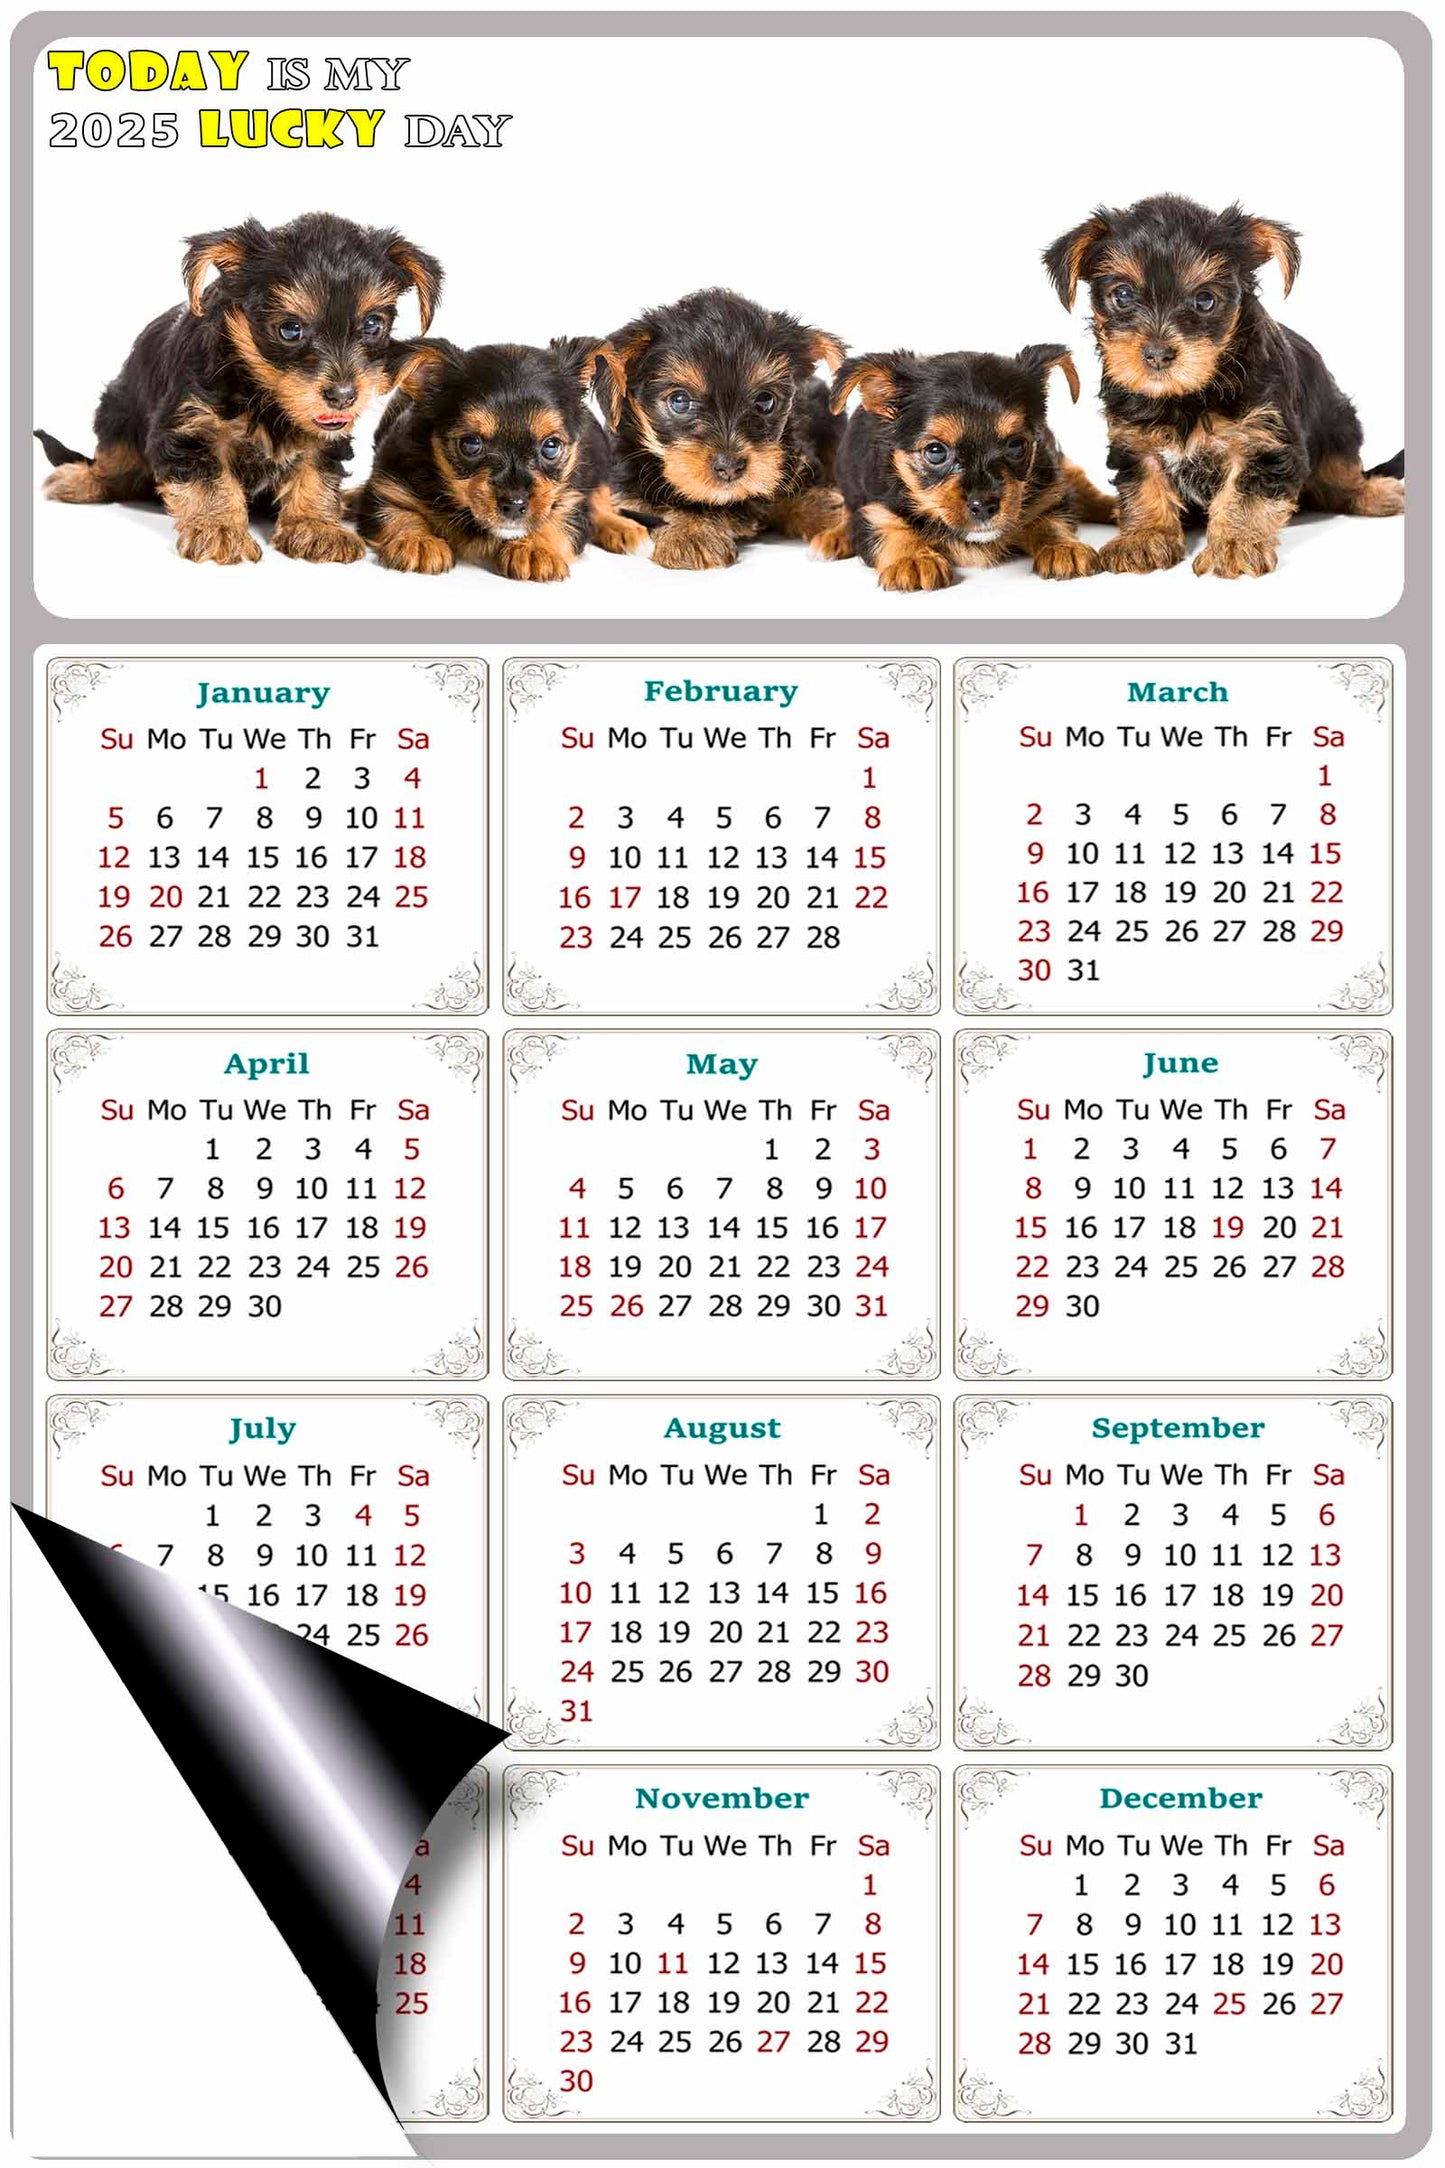 2025 Magnetic Calendar - Today is My Lucky Day (Fade, Tear, and Water Resistant)- Dogs Themed 016